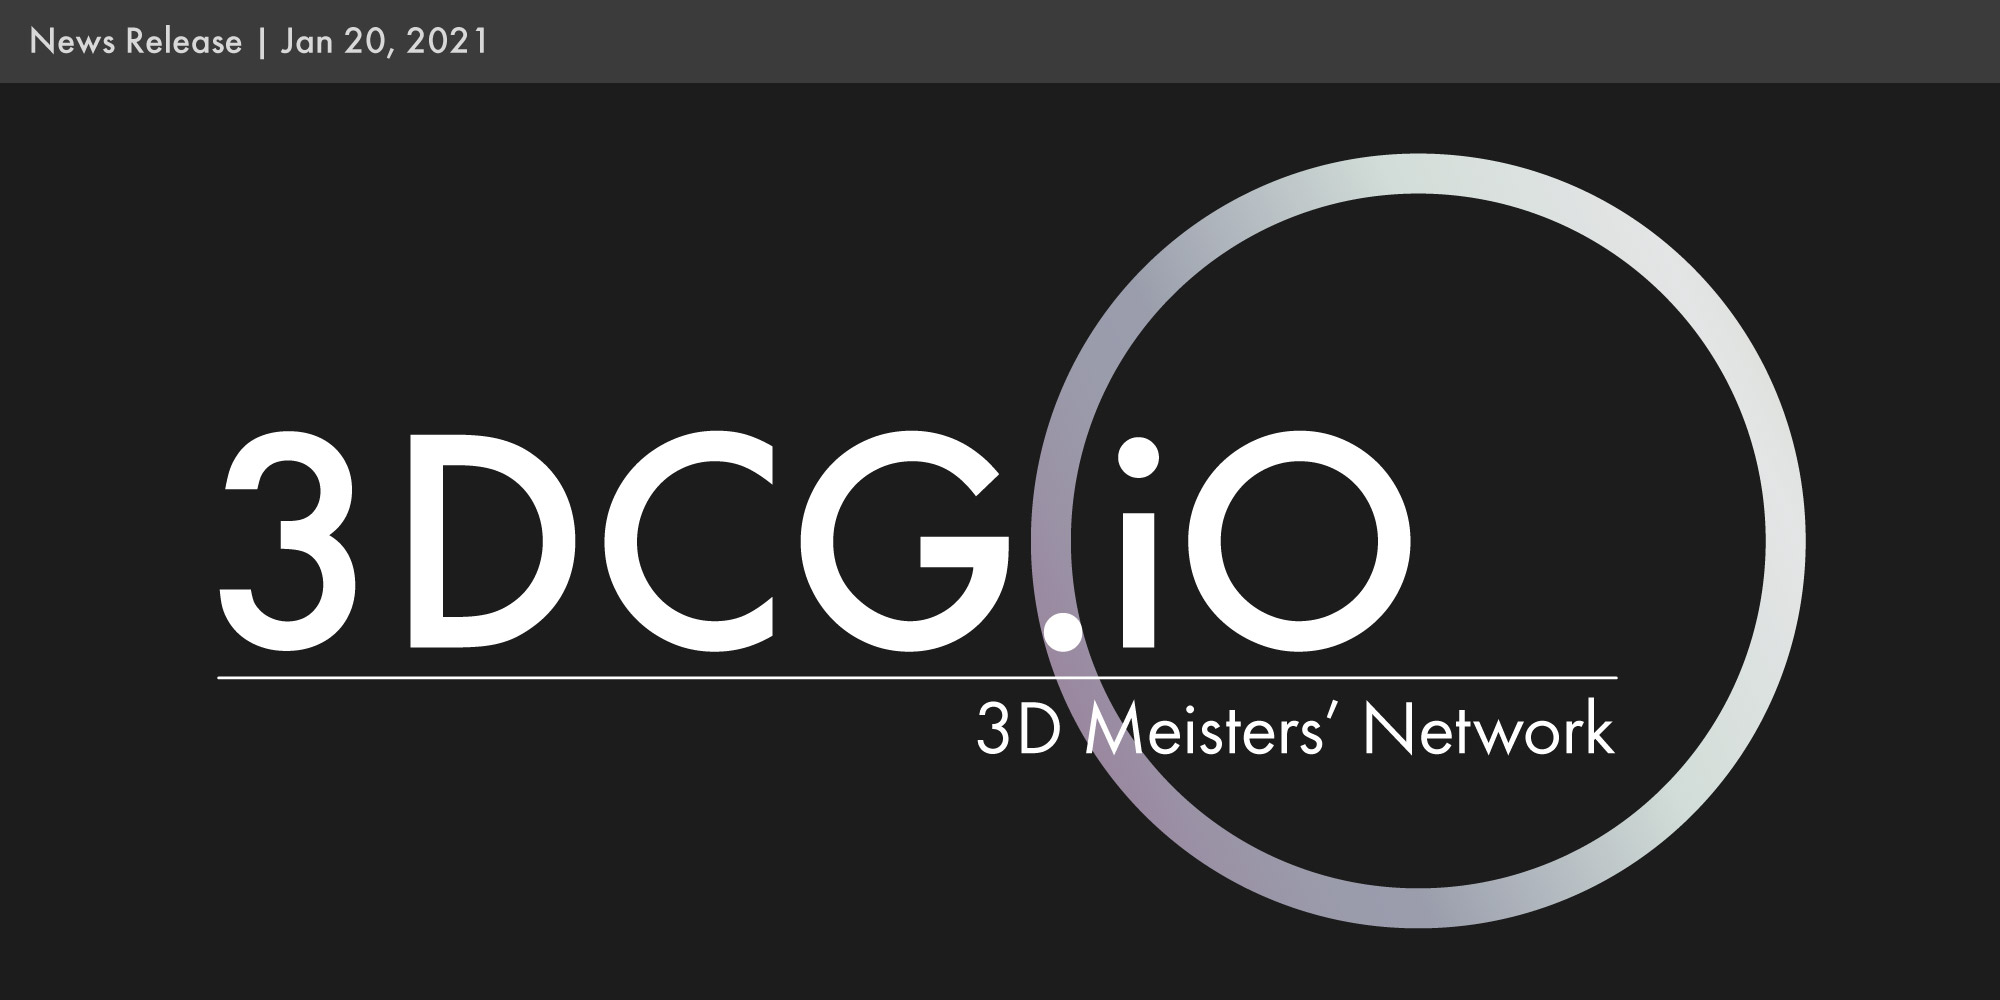 StockGraphy launches 3DCG.iO, the top global 3D Meisters’ network that promotes industrial utilization of Online3D technology.